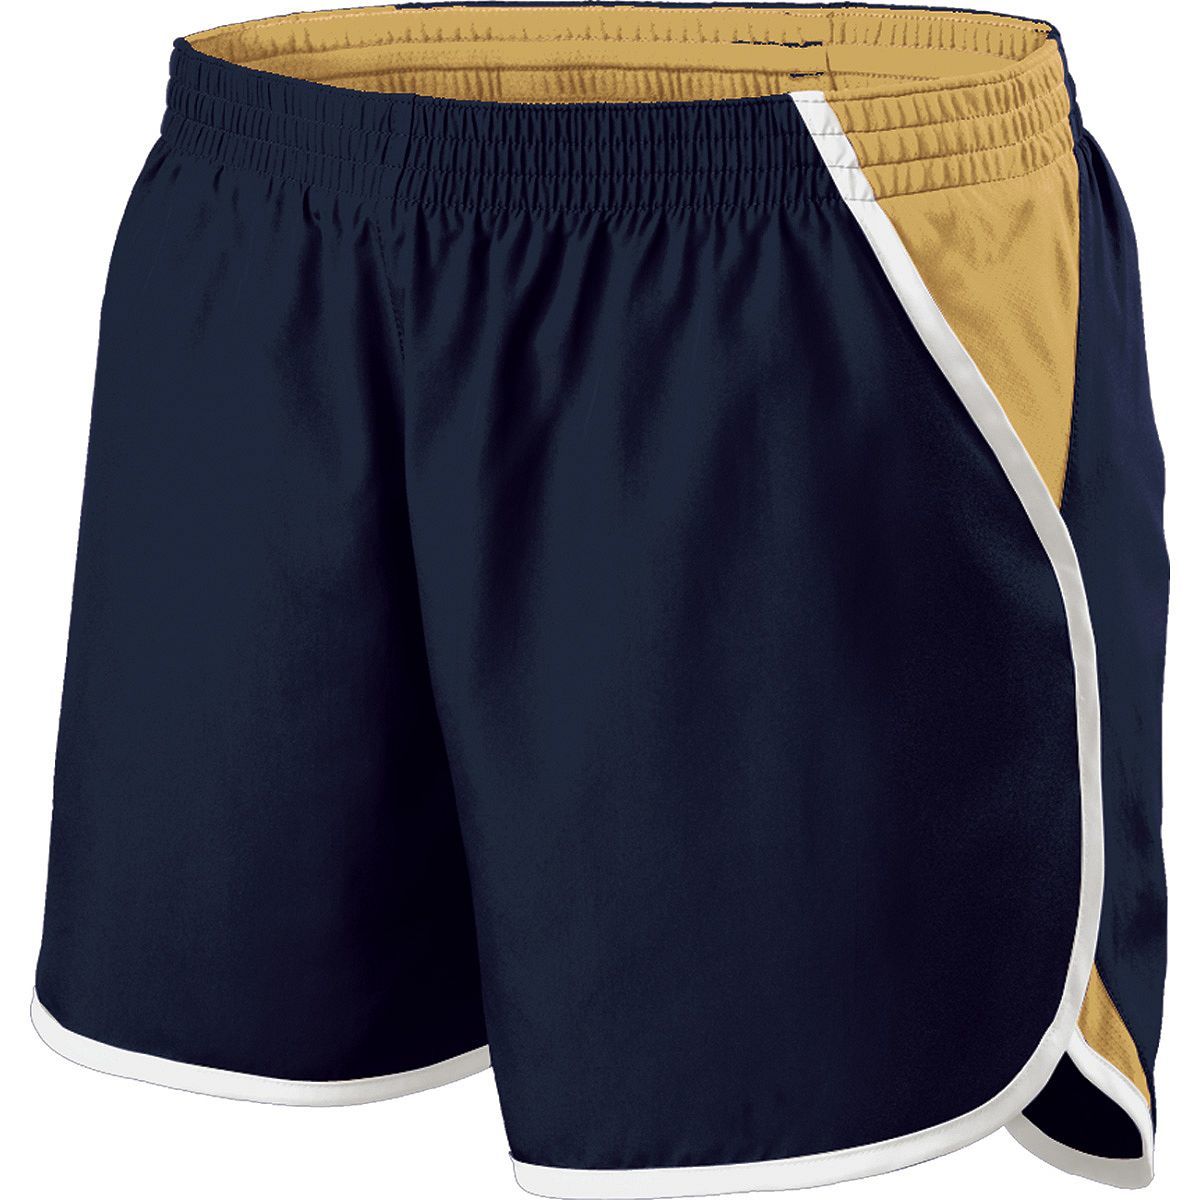 Holloway Energize Shorts in Navy/Vegas Gold/White  -Part of the Ladies, Ladies-Shorts, Holloway product lines at KanaleyCreations.com